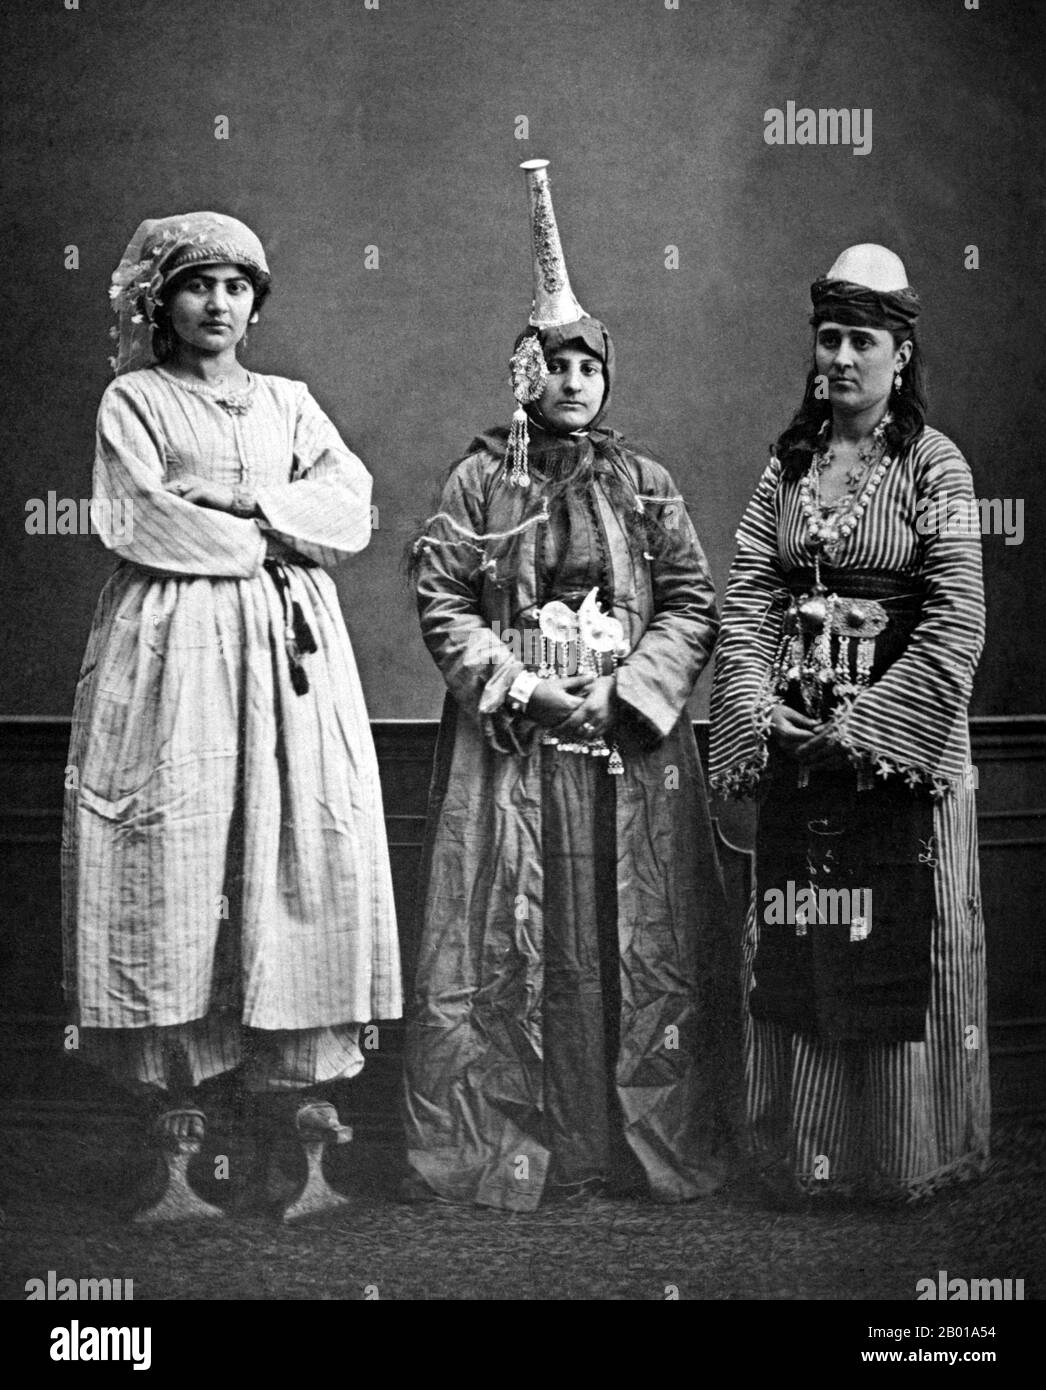 Syria: Three Syrian women, left to right - urban Arab, Druze, rural Arab. The druze woman is wearing a tantour headdress. Photo by Pascal Sebah (1823 - 25 June 1886), Damascus, 1873.  The Druze (Arabic: derzī or durzī, plural durūz, Hebrew: druzim) are an esoteric, monotheistic religious community found primarily in Syria, Lebanon, Israel, and Jordan, which emerged during the 11th century from Ismailism, that incorporated several elements of Gnosticism, Neoplatonism and other philosophies. The Druze call themselves Ahl al-Tawhid (People of Unitarianism or Monotheism) or al-Muwaḥḥidūn. Stock Photo